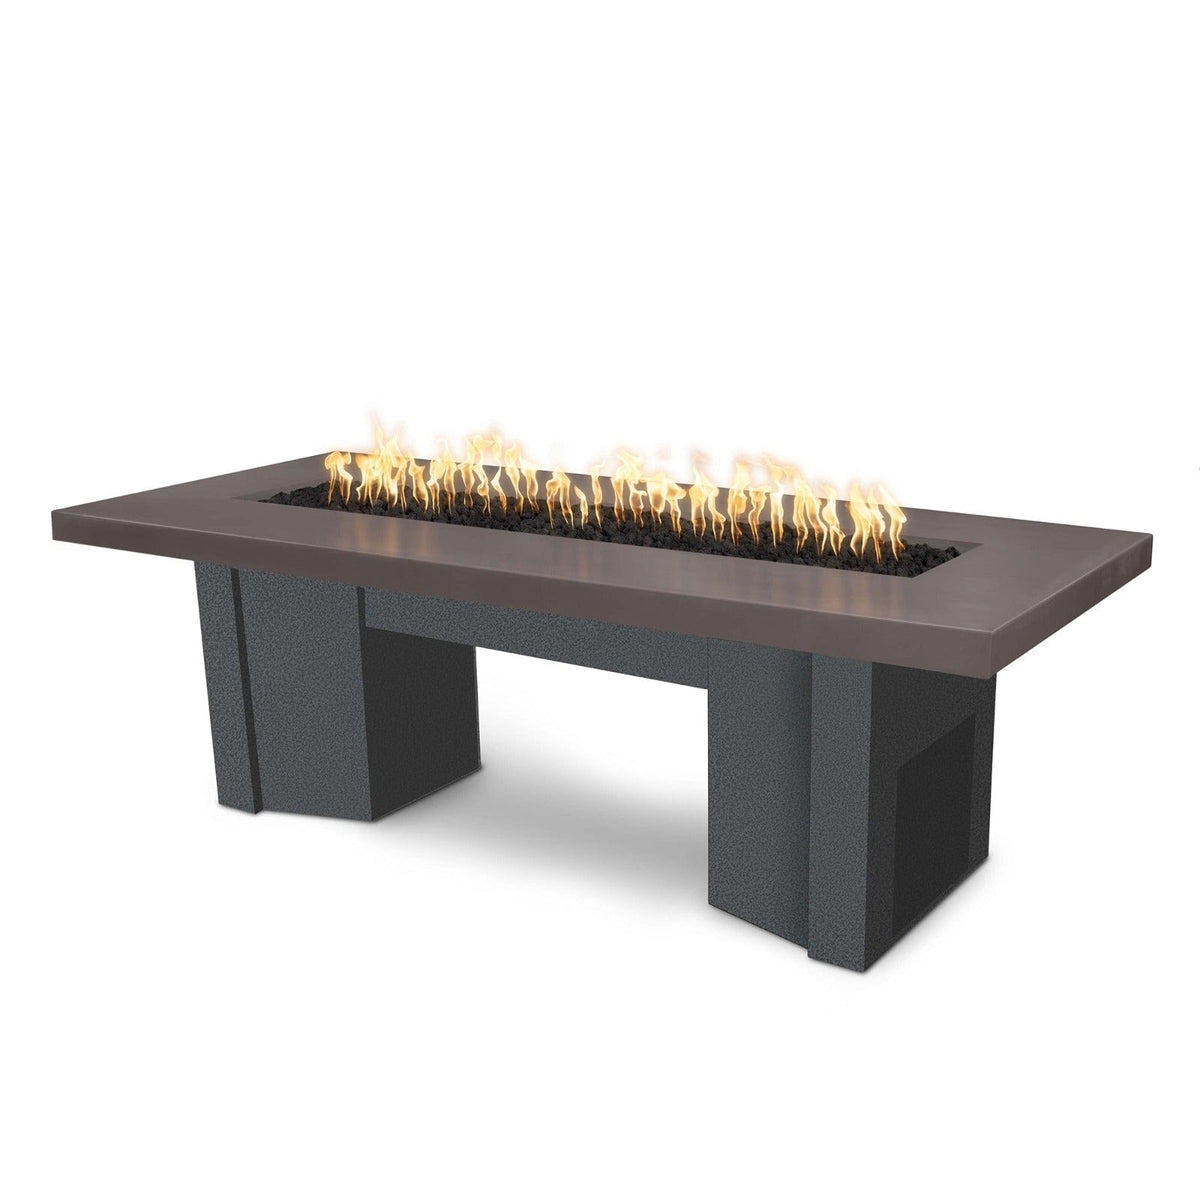 The Outdoor Plus Fire Features Chestnut (-CST) / Silver Vein Powder Coated Steel (-SLV) The Outdoor Plus 60&quot; Alameda Fire Table Smooth Concrete in Liquid Propane - Match Lit / OPT-ALMGFRC60-LP